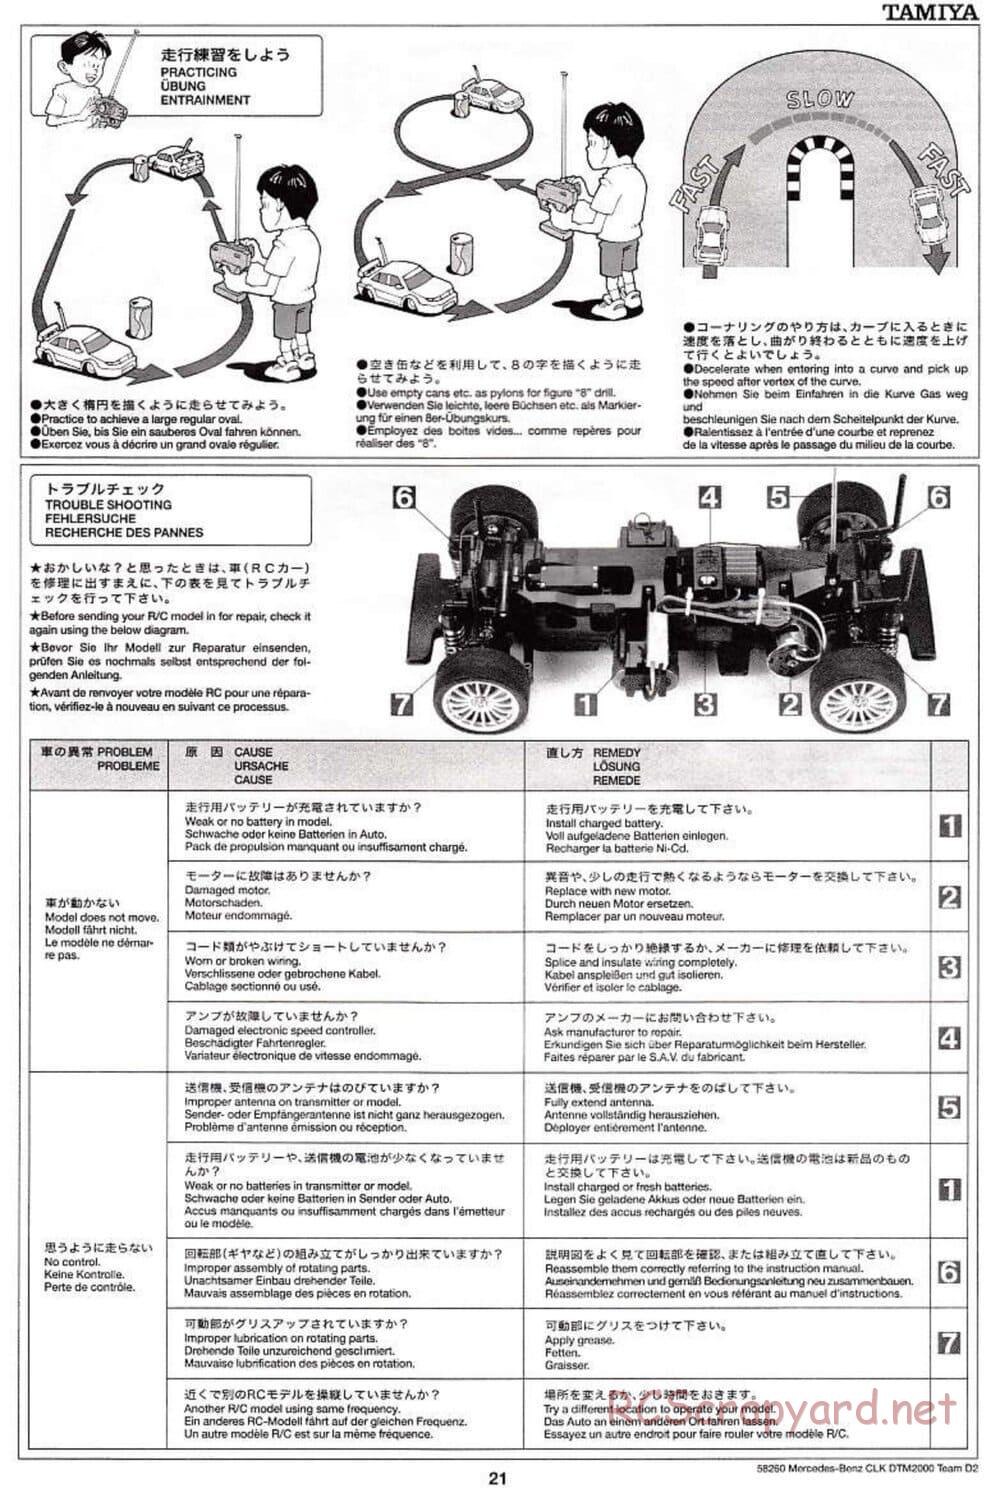 Tamiya - Mercedes Benz CLK DTM 2000 Team D2 - TL-01 Chassis - Manual - Page 21